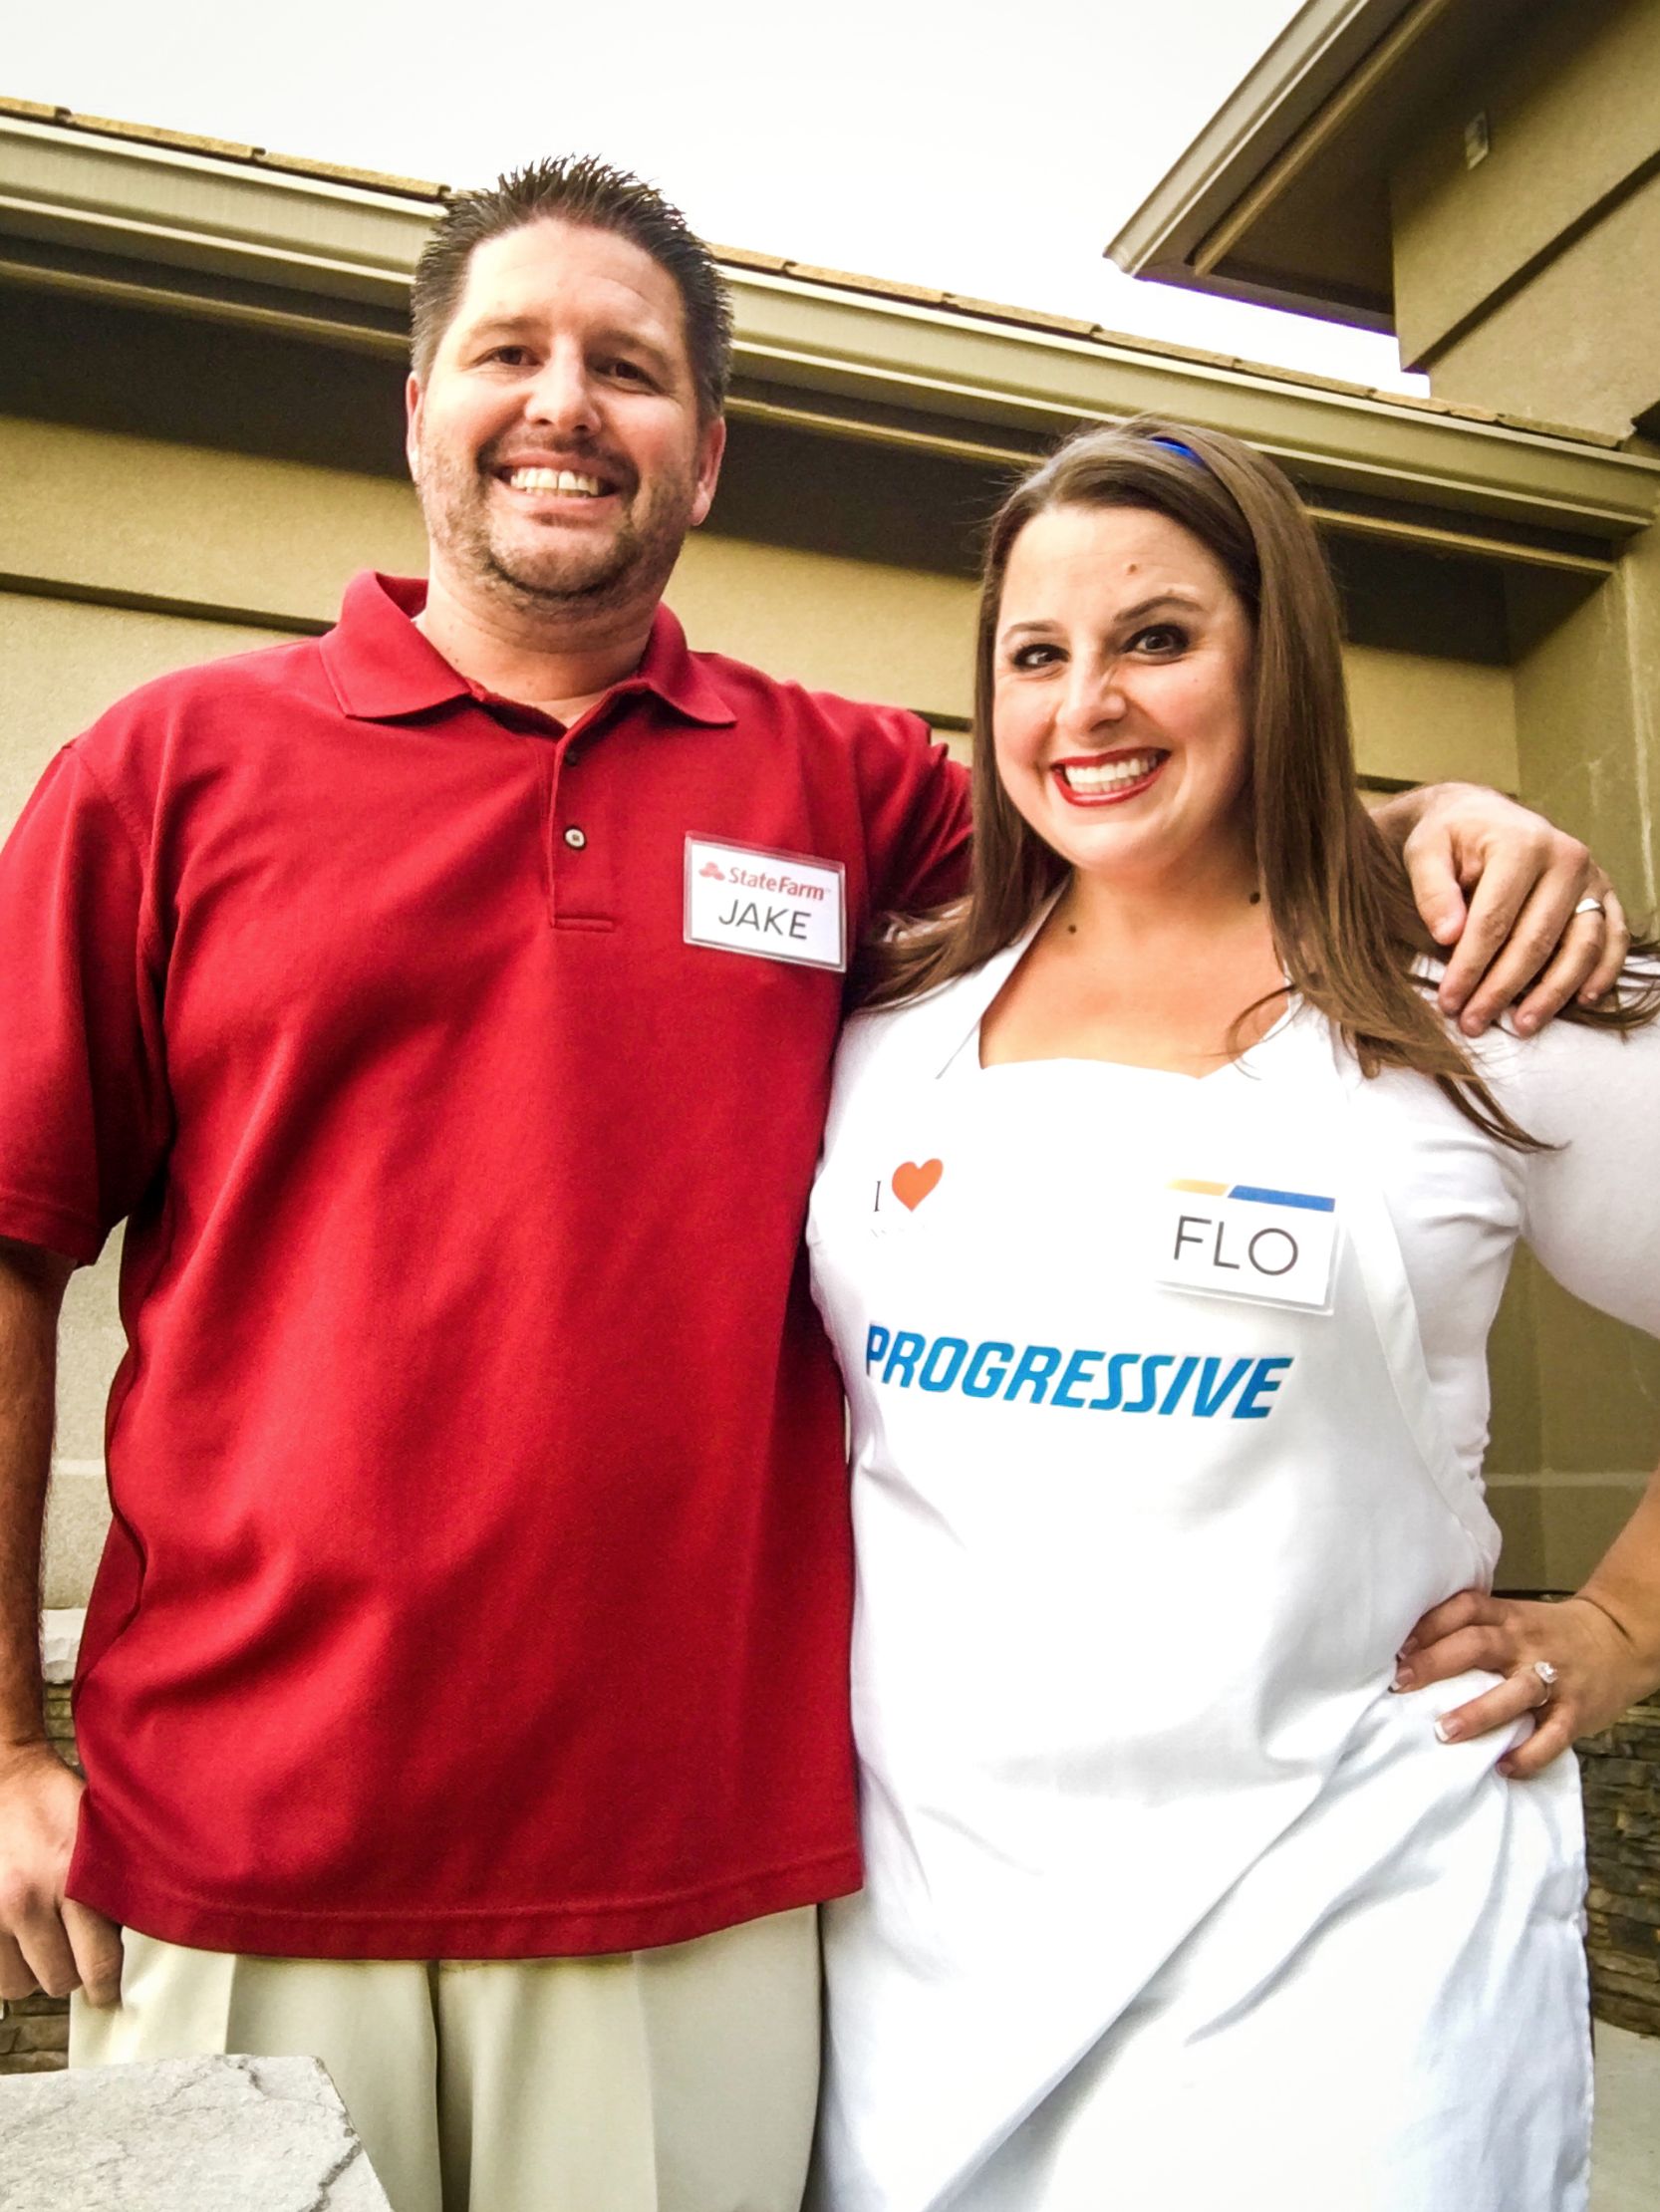 Easy Couple Halloween Costumes - Jake From State Farm and Flo From Progressive